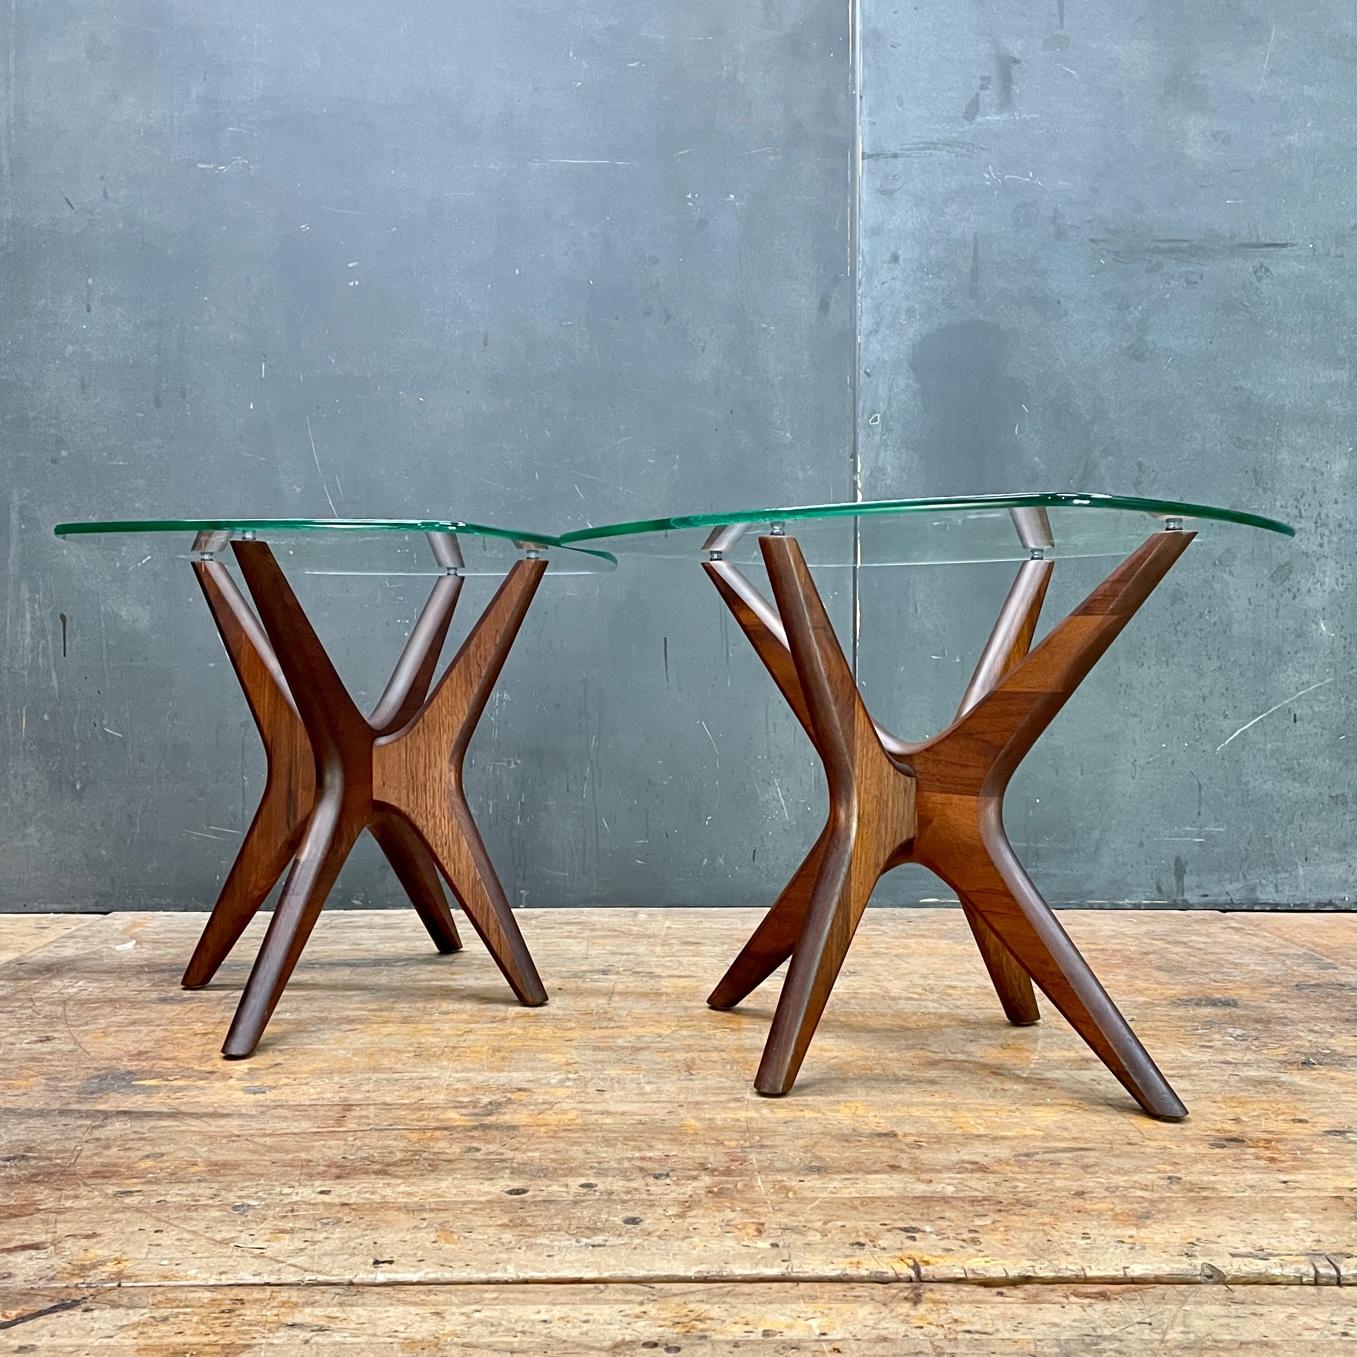 Late sixties whimsical walnut side tables. Mod but with a deep hued organic Cabinmodern vibe too, perfect for your post and beam atomic ranch!!!